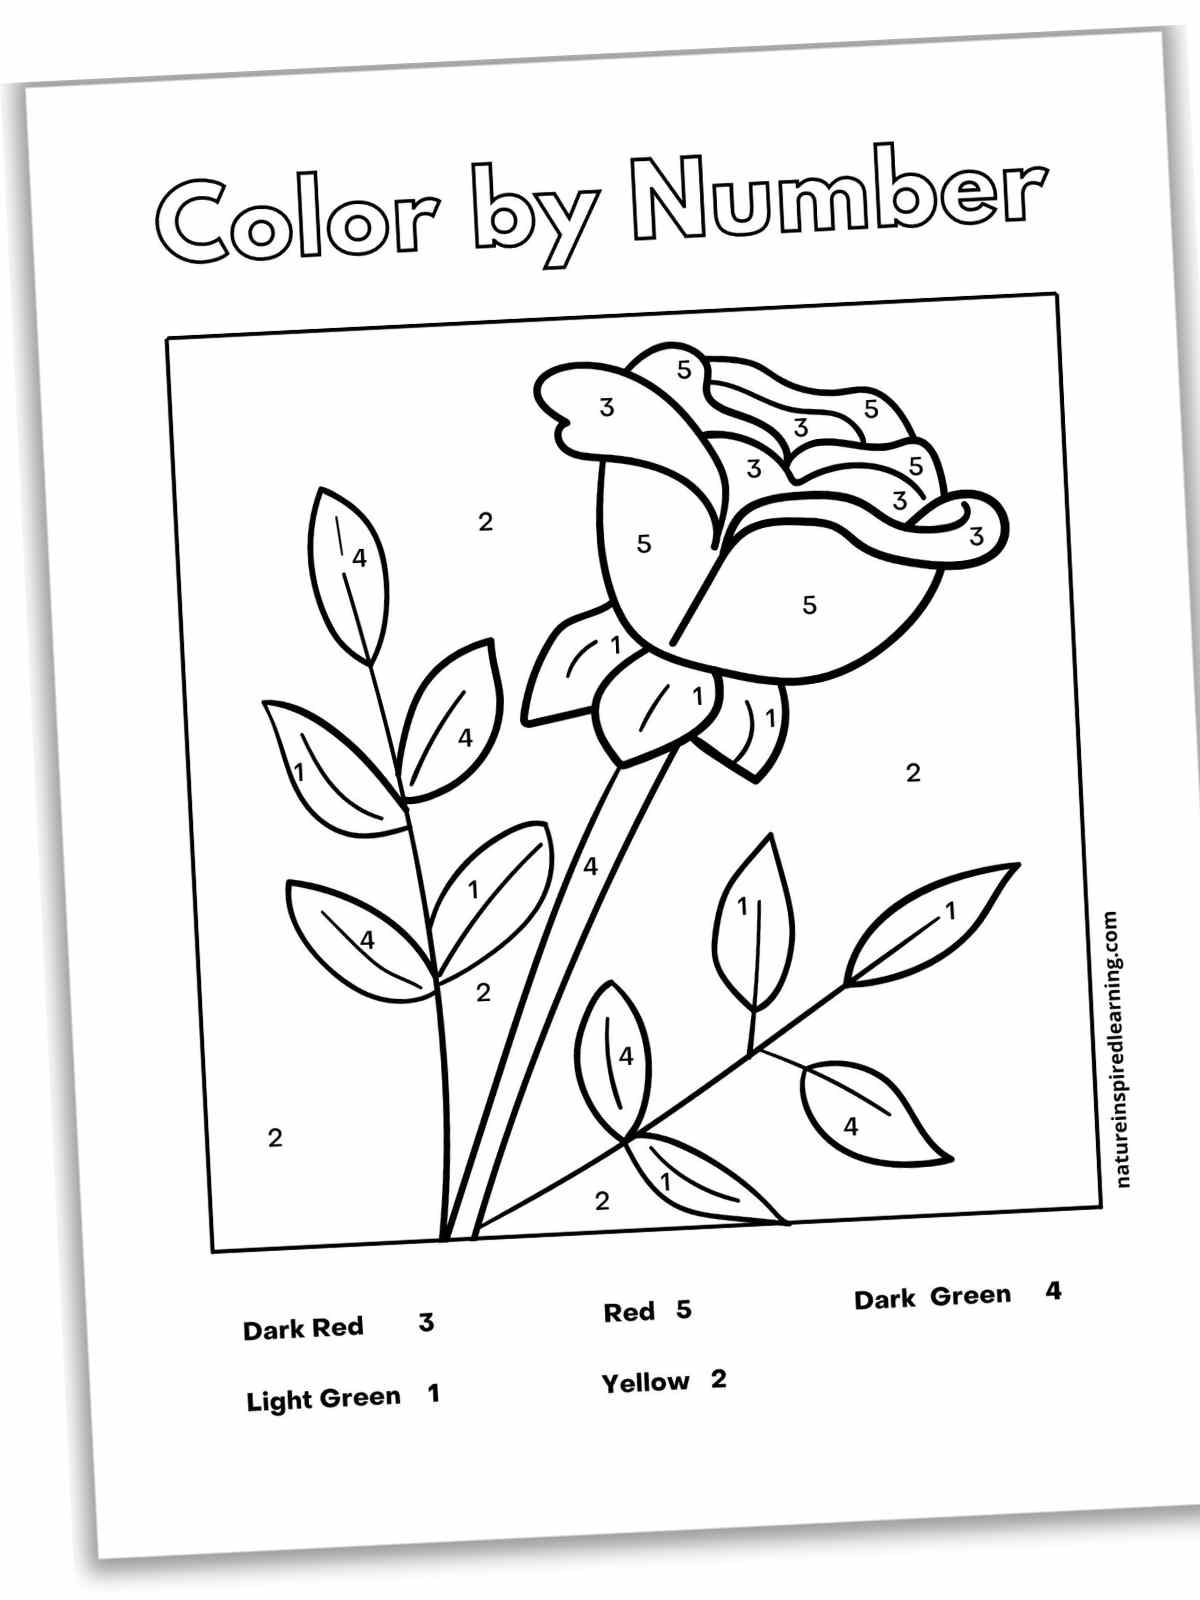 sheet with a black and white outline of a single rose with leaves with numbers on the flower stem, petals, leaves, and background.